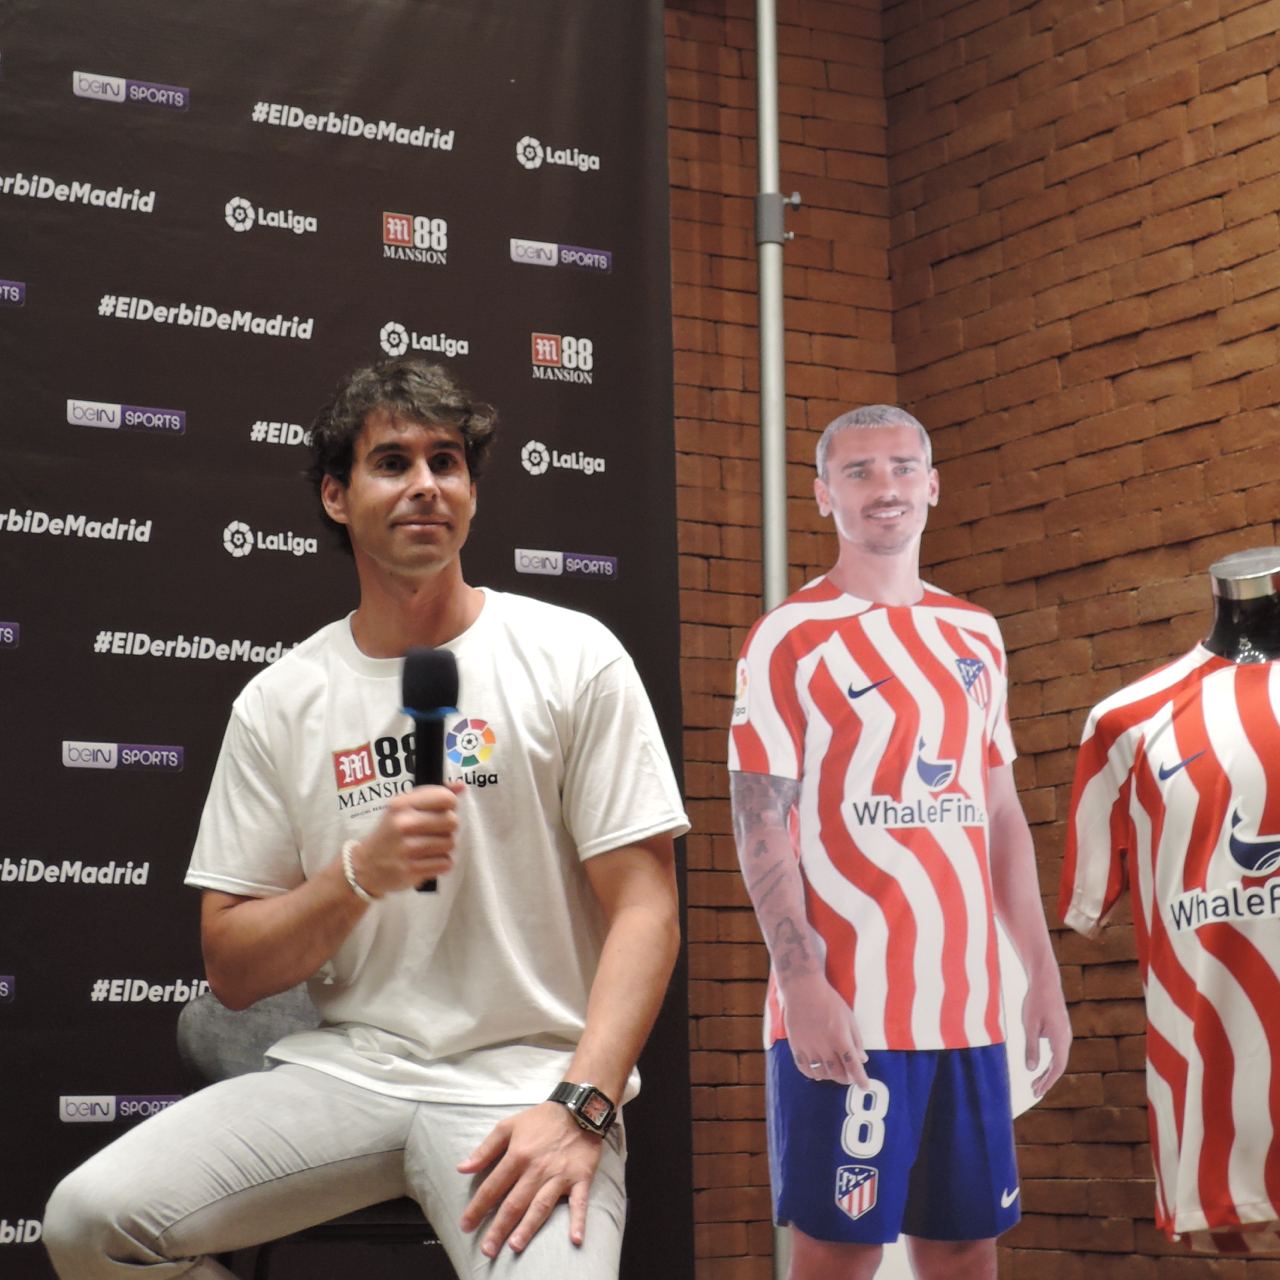 Tiago Mendes shared stories about his experiences as a professional football player with Filipino fans